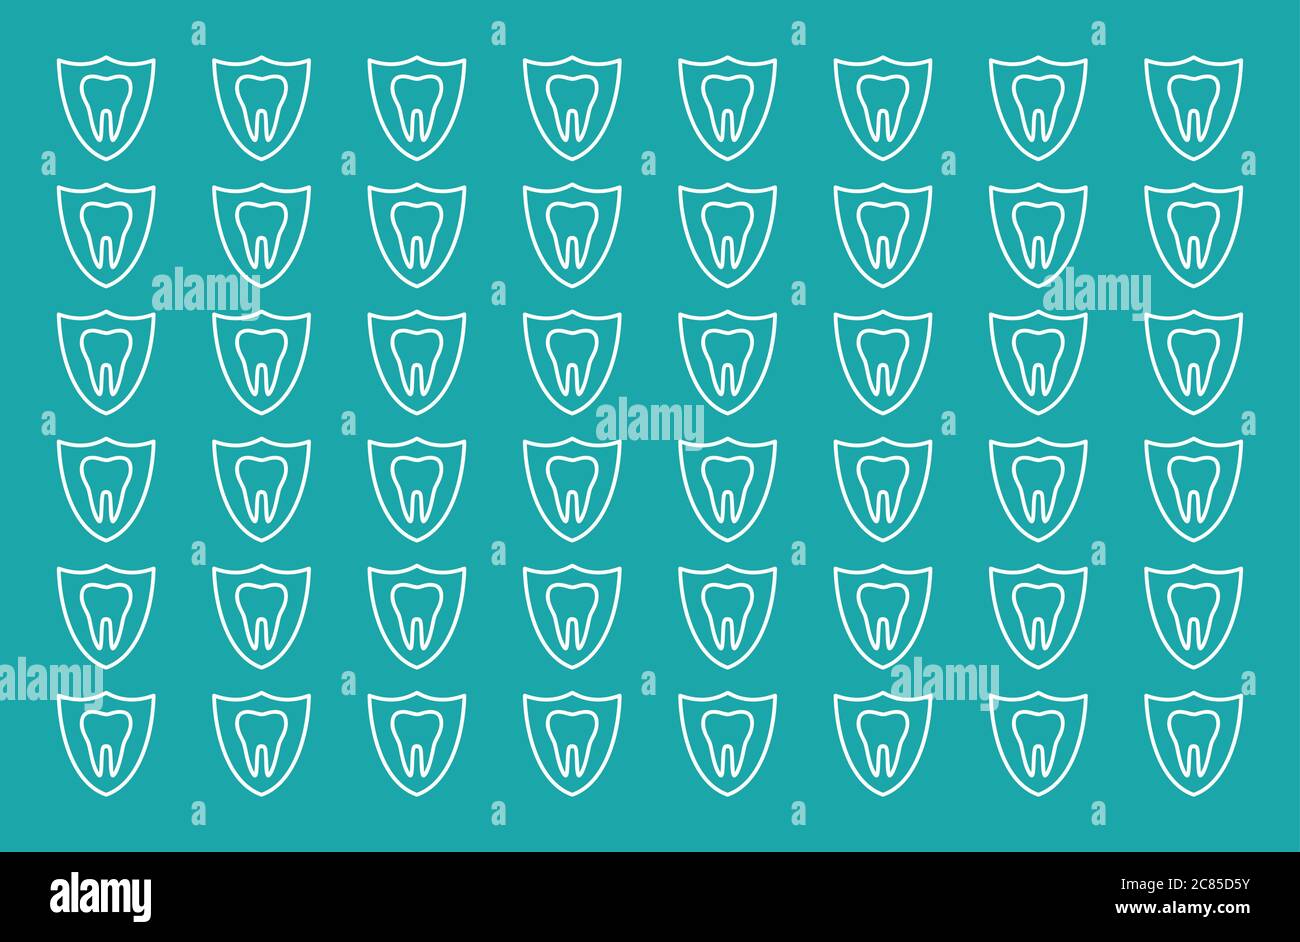 Seamless pattern of dentistry symbols: dental tools, braces, teeth, implant, toothache, hygiene, tooth decay, family dental Stock Vector